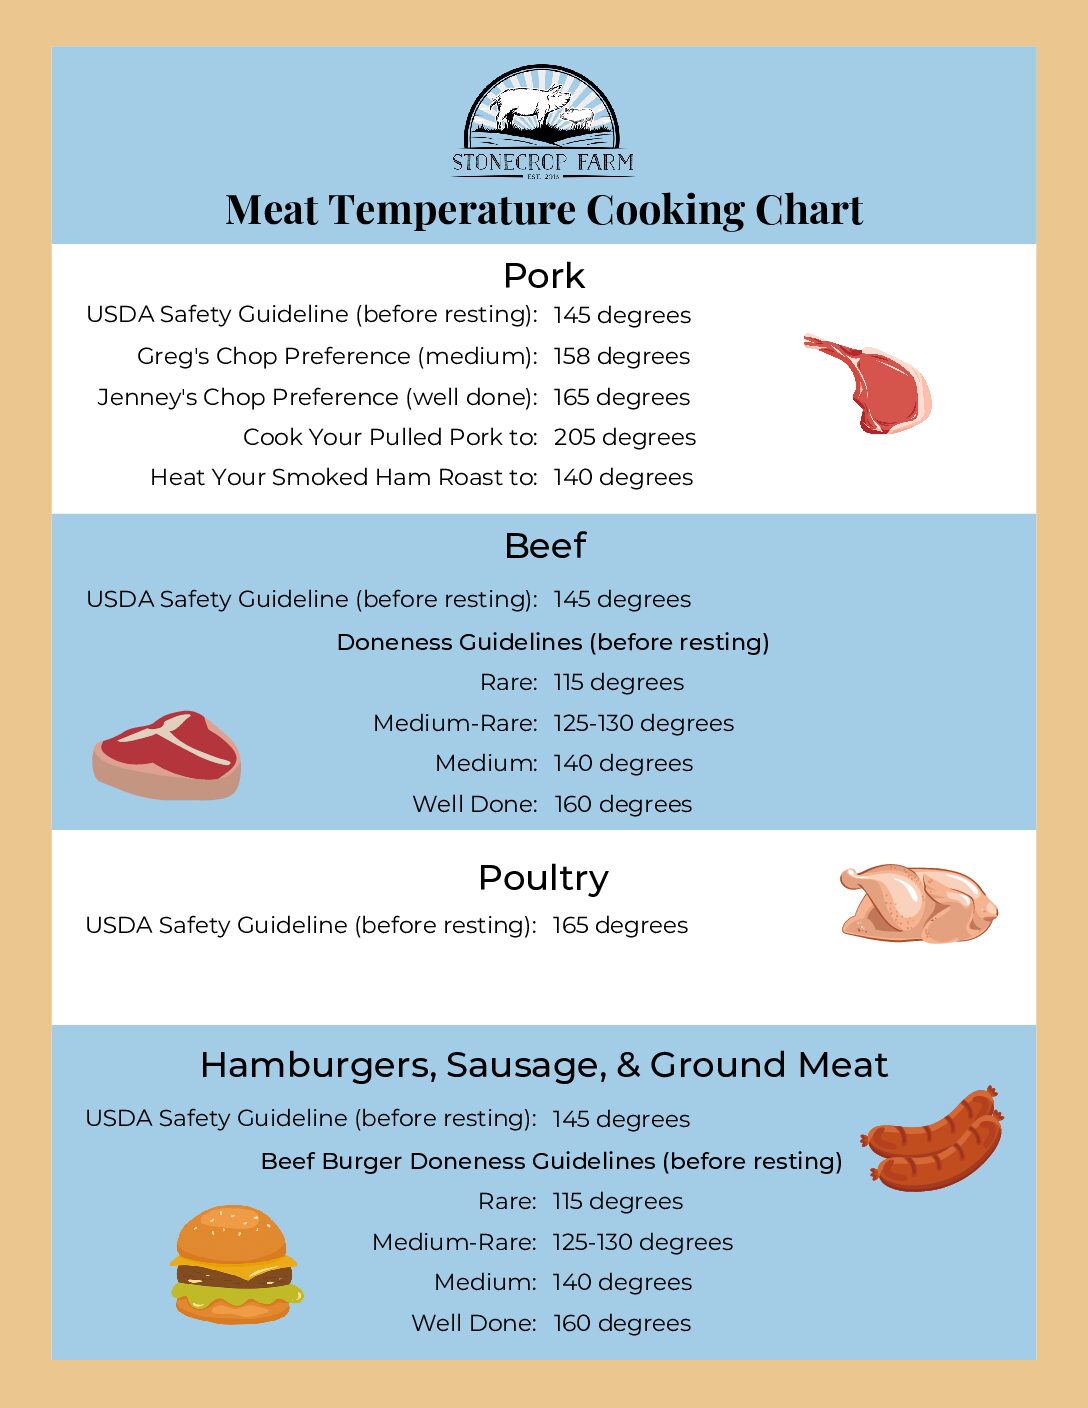 Meat Temperature Cooking Guide